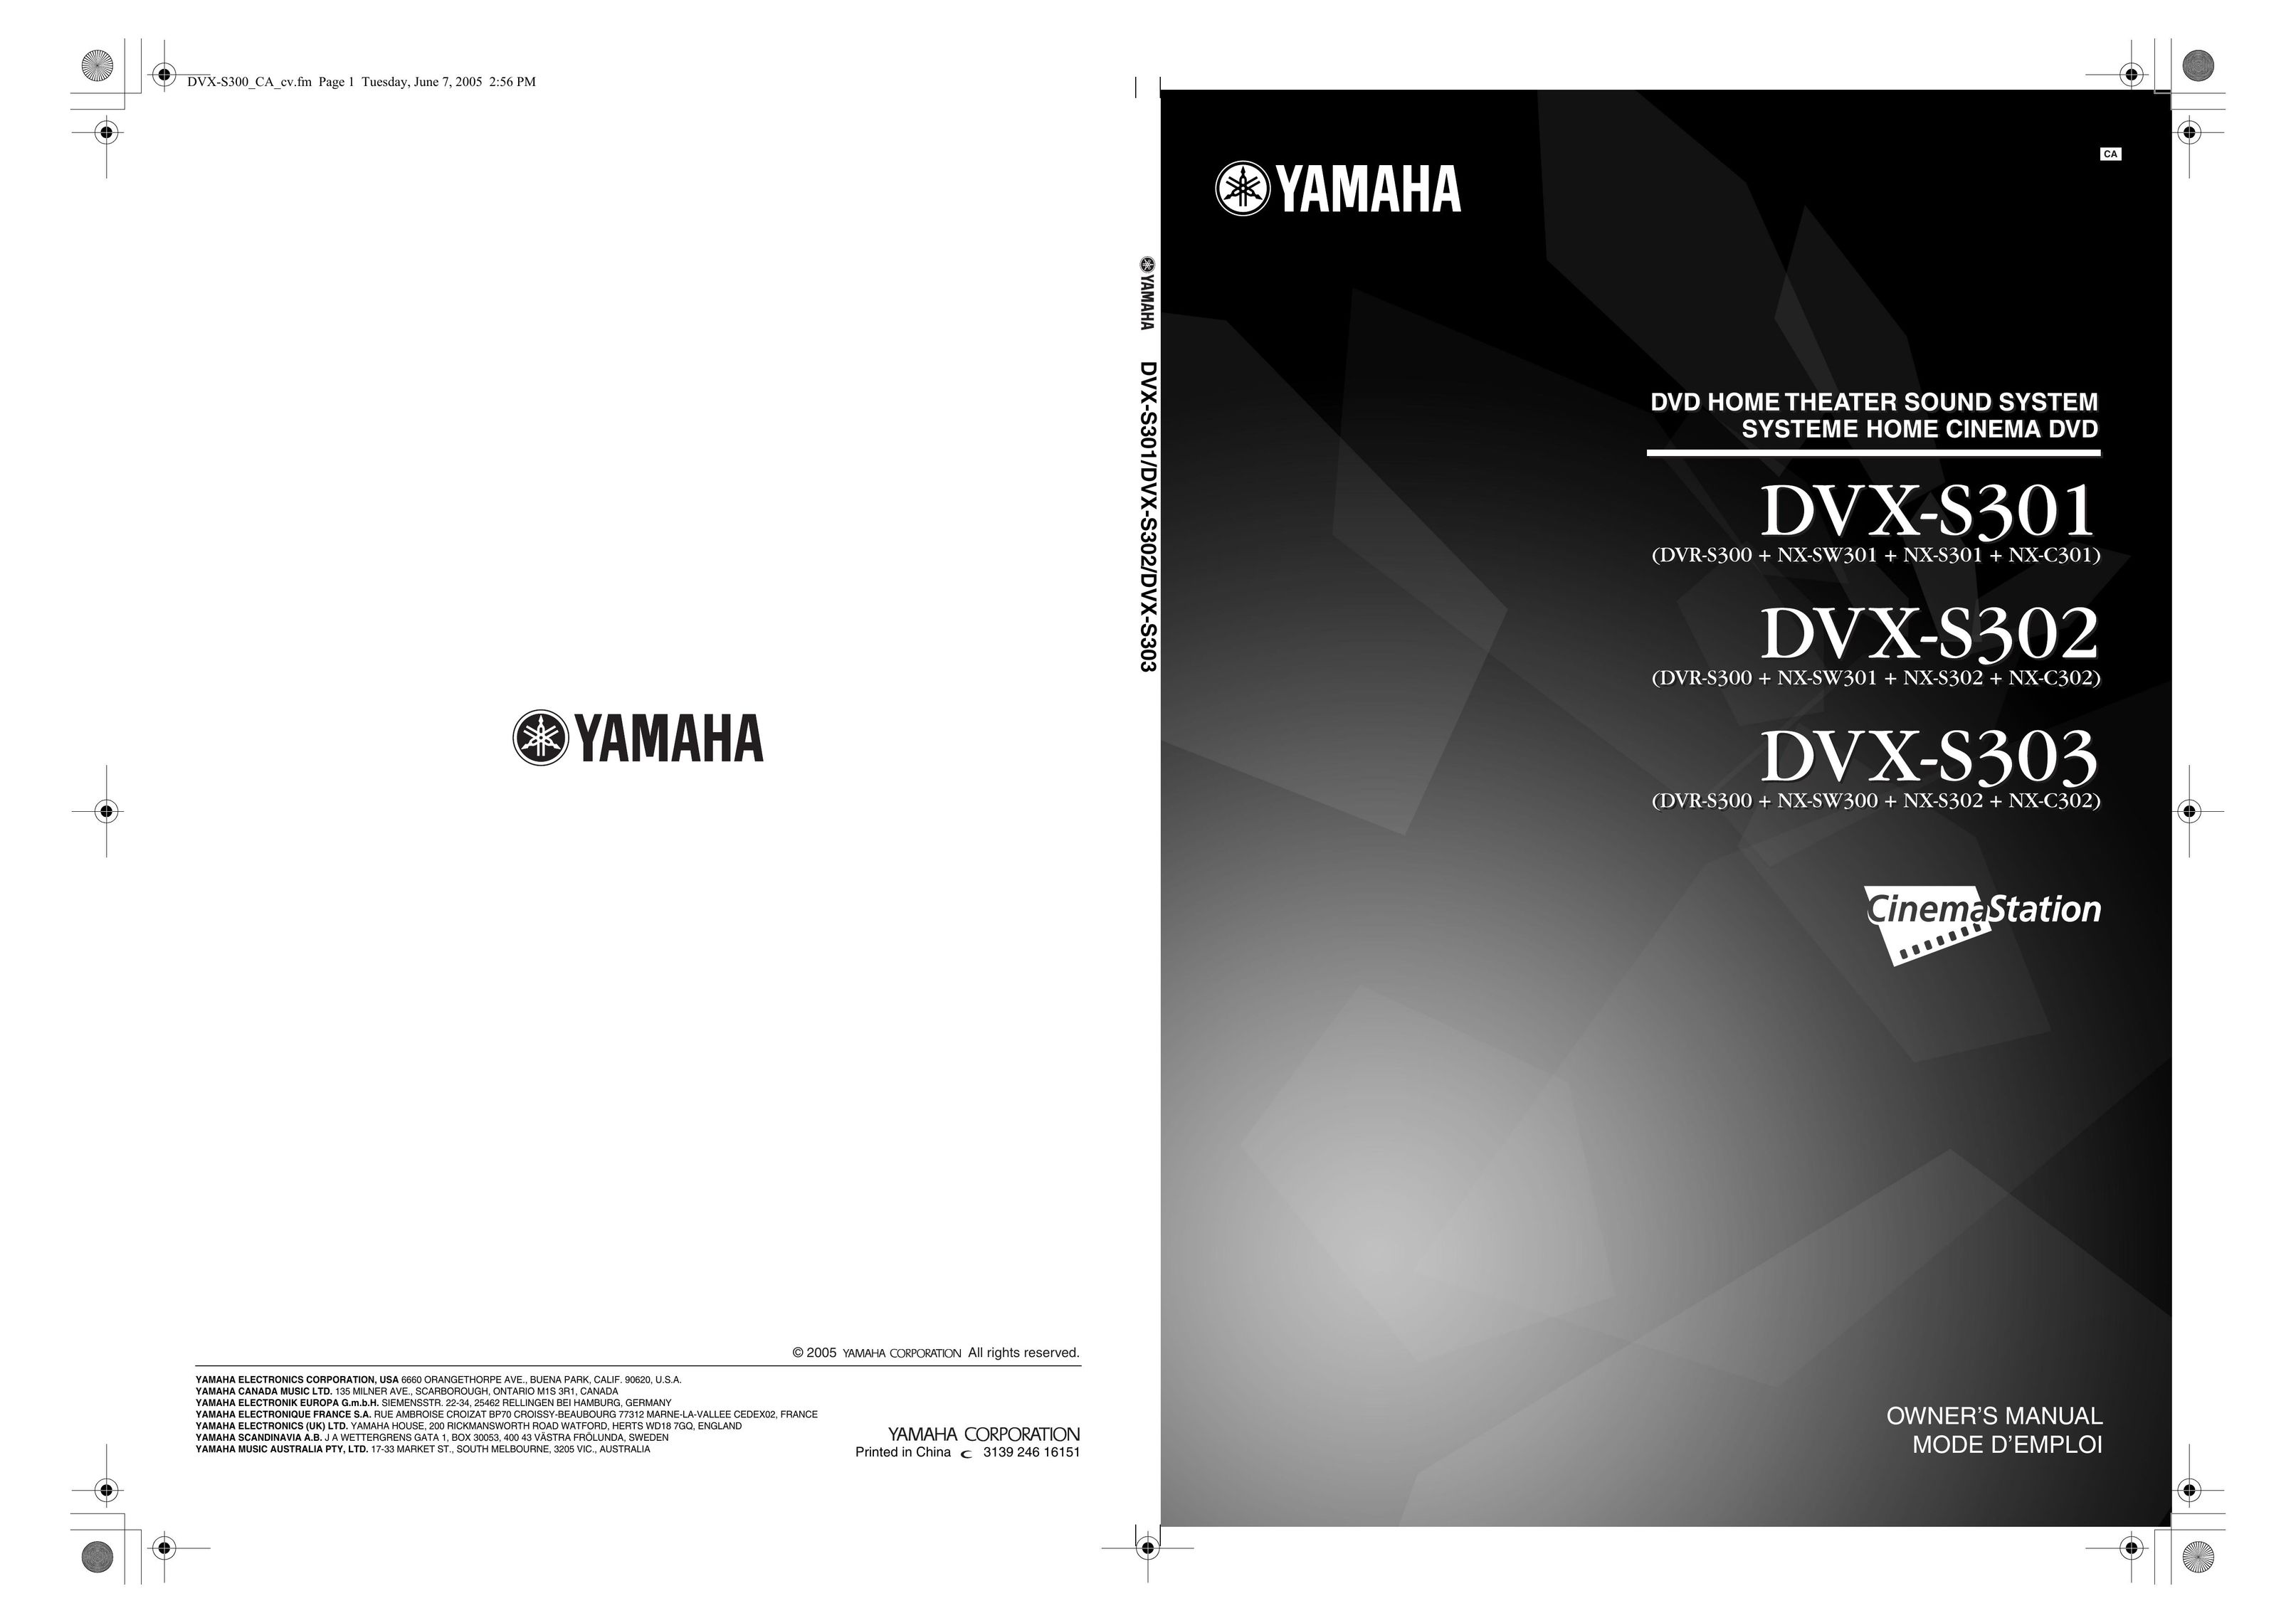 Yamaha DVX-S302 Home Theater System User Manual